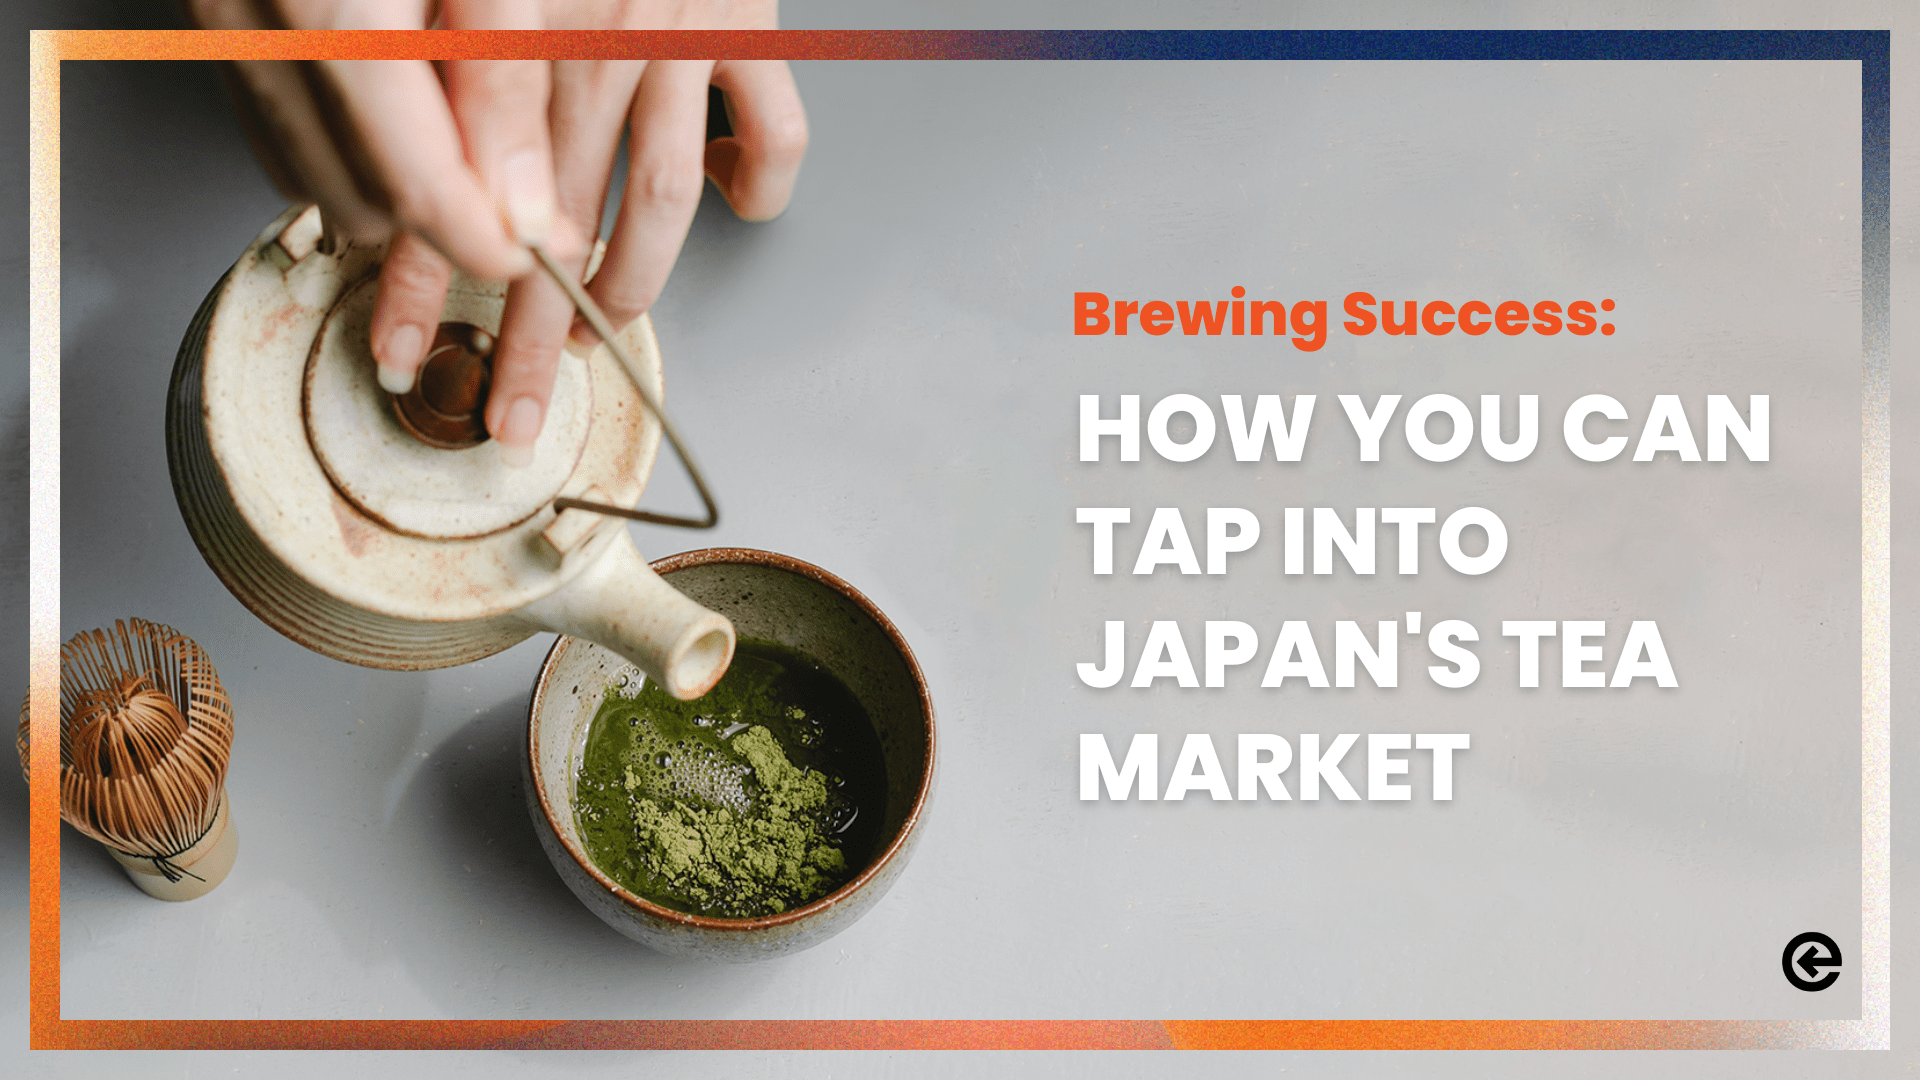 Brewing Success How You Can Tap into Japan's Tea Market